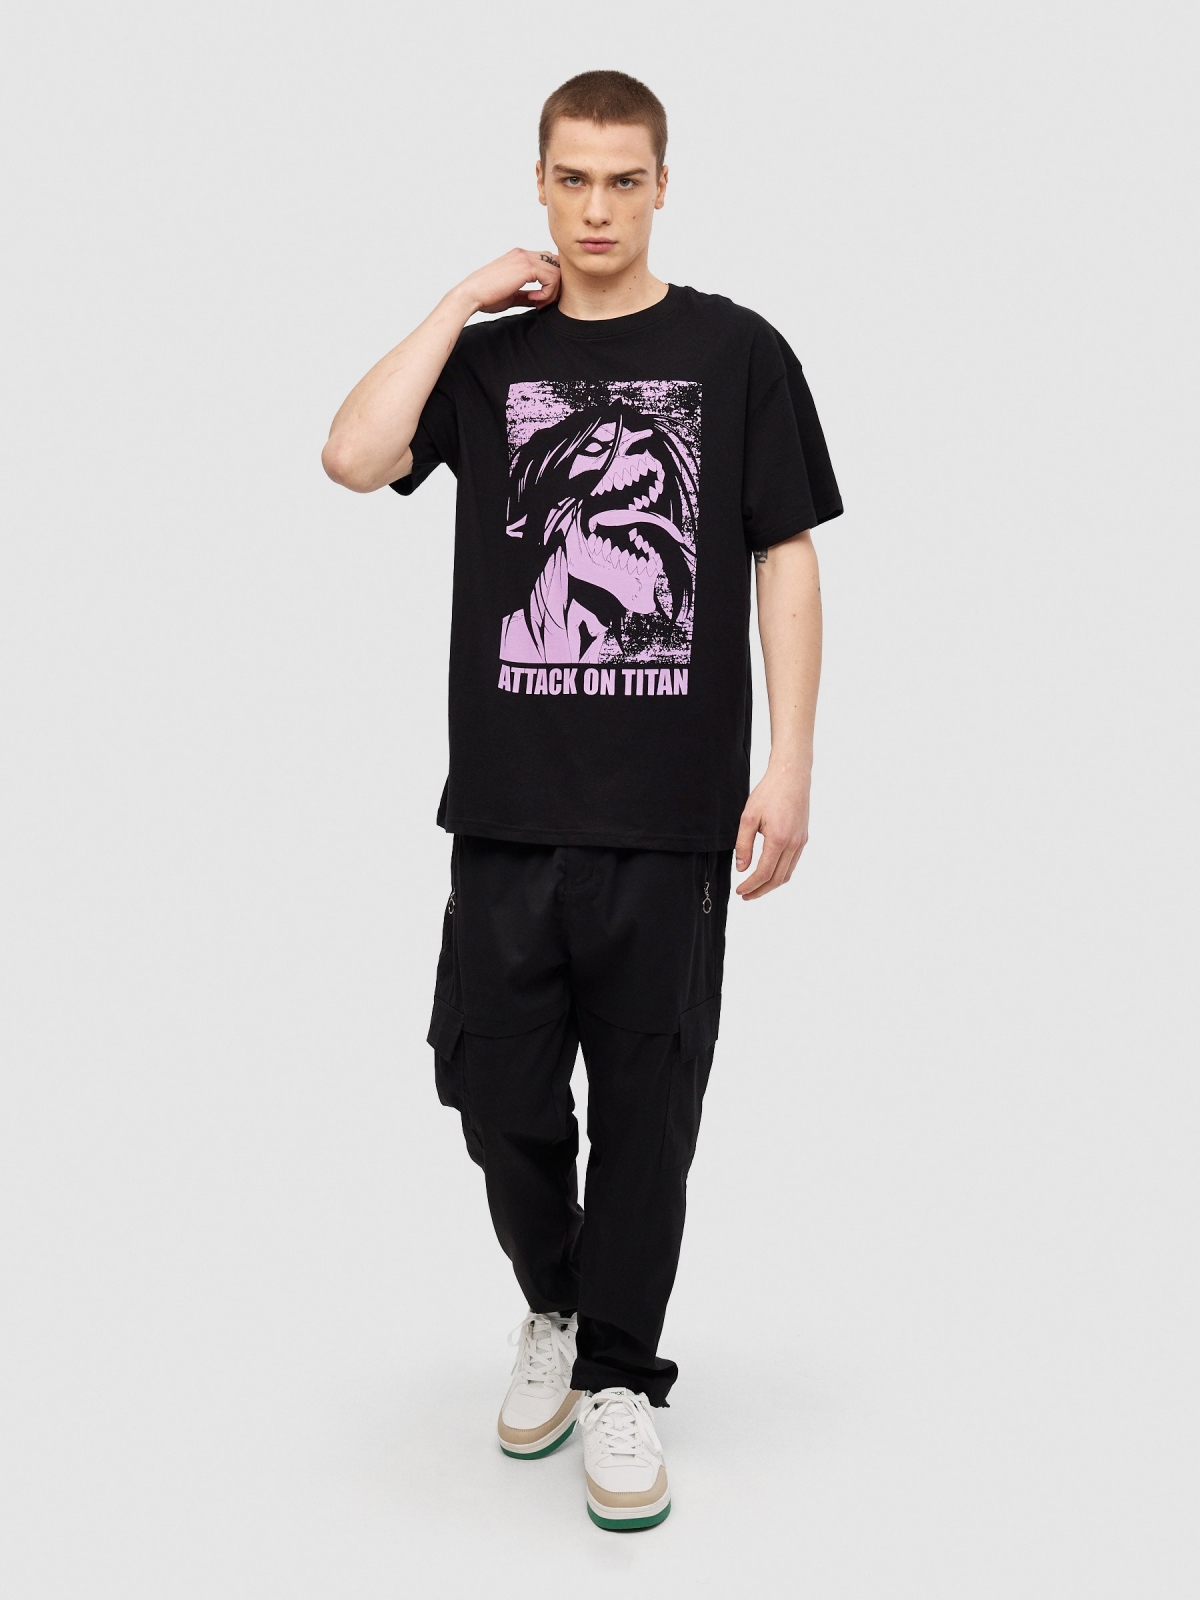 Attack On Titan oversize t-shirt black front view